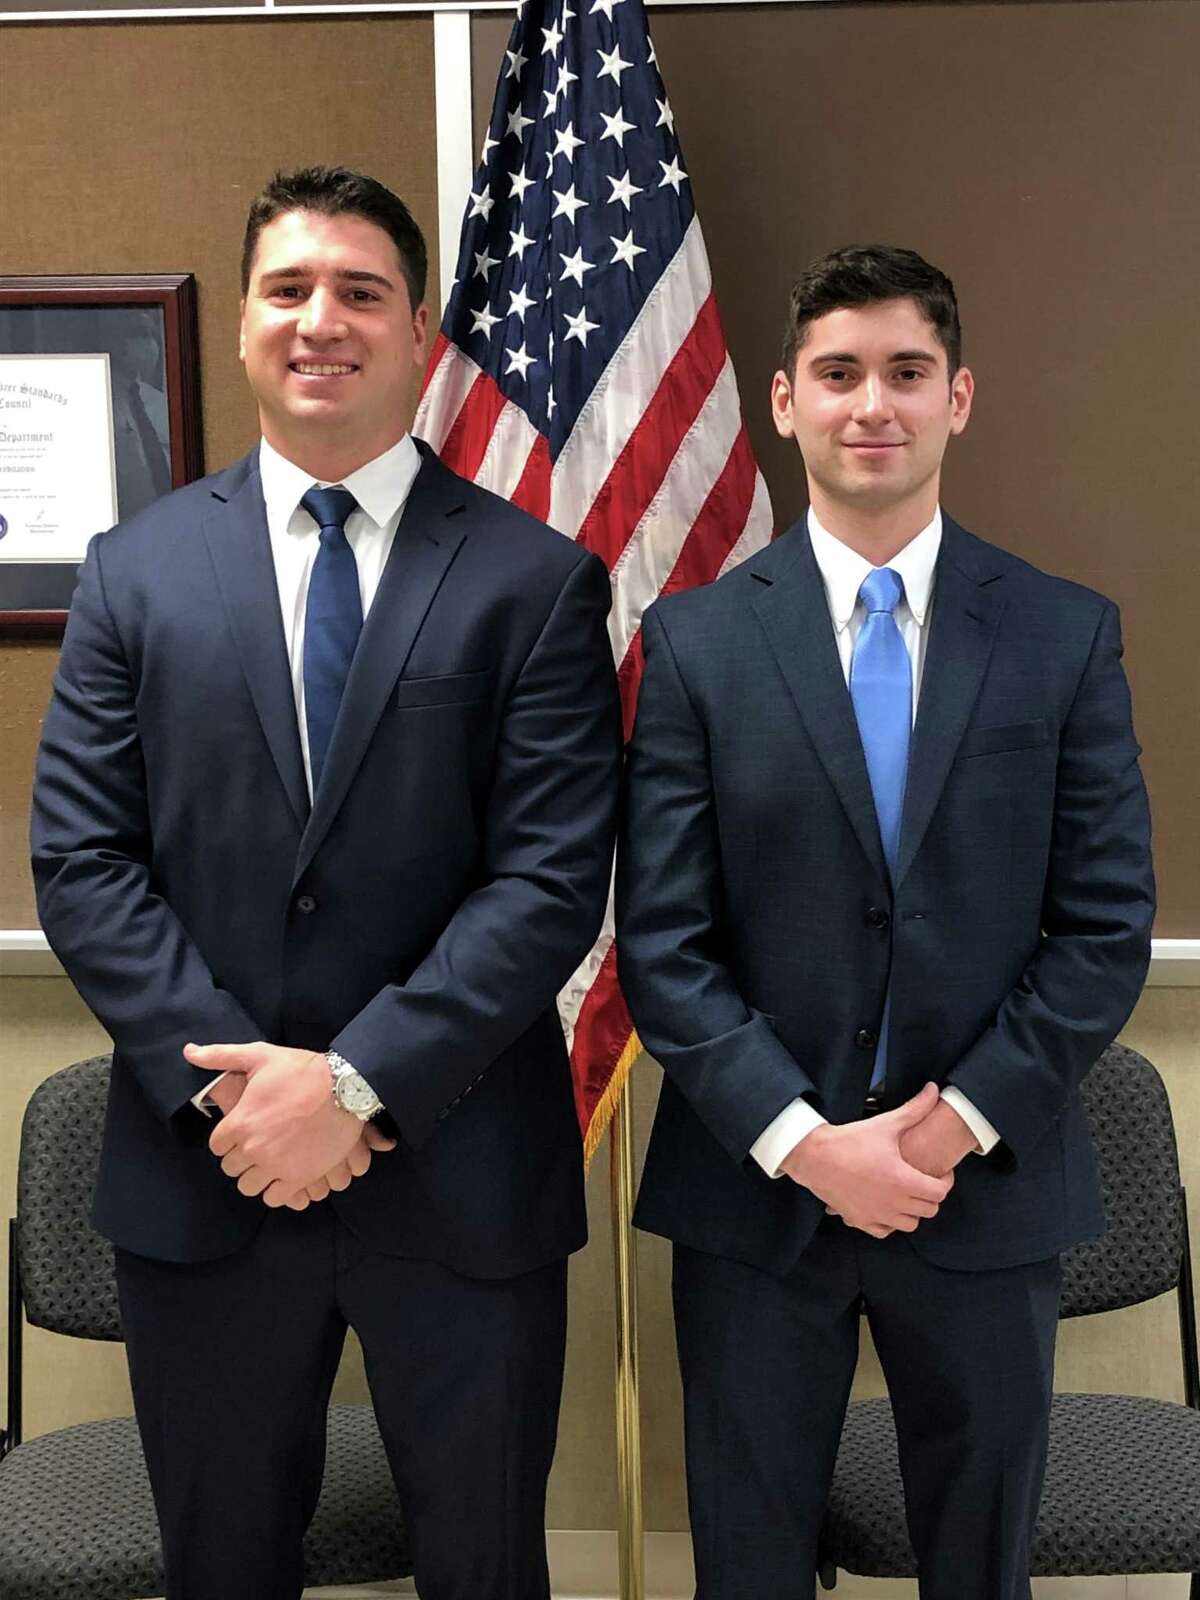 Colin Markus, age 27 of Stratford (left), and Jack Kingdon, age 24 of Woodbury,  were recently sworn in as new officers with the Trumbull Police Department.